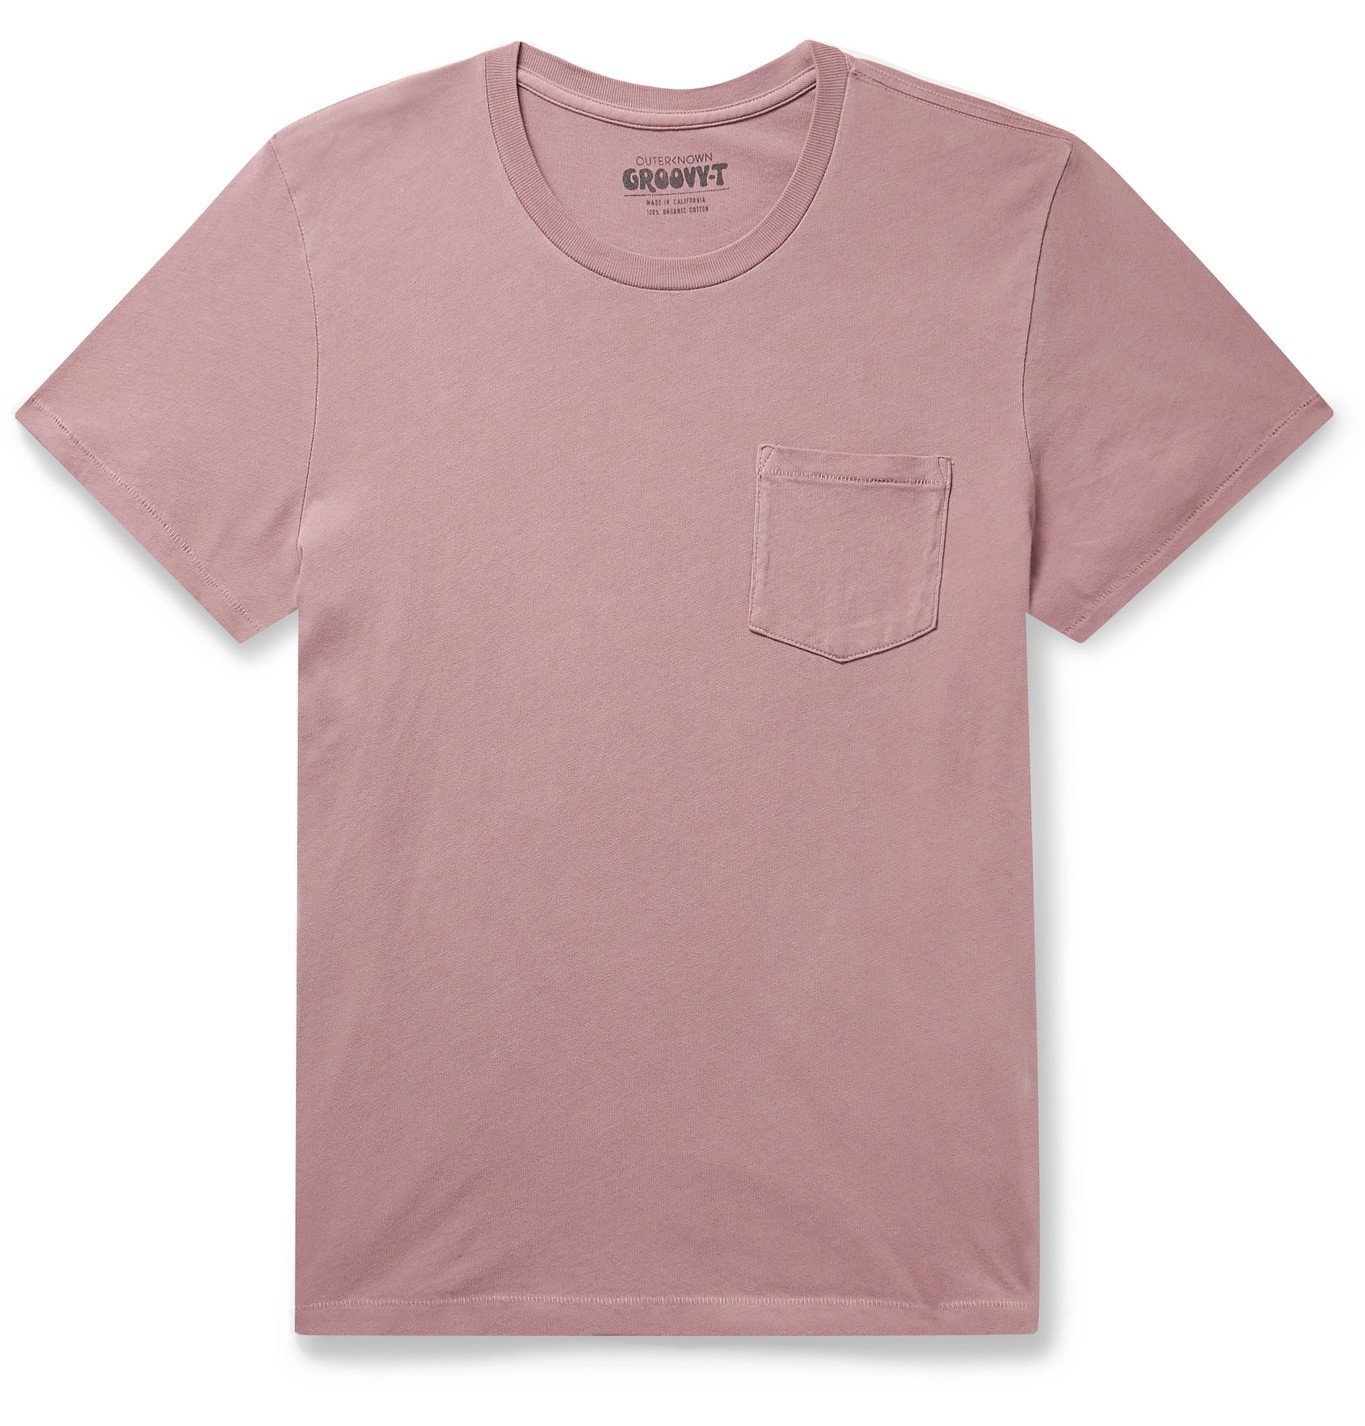 Outerknown - Groovy Organic Cotton-Jersey T-Shirt - Pink Outerknown